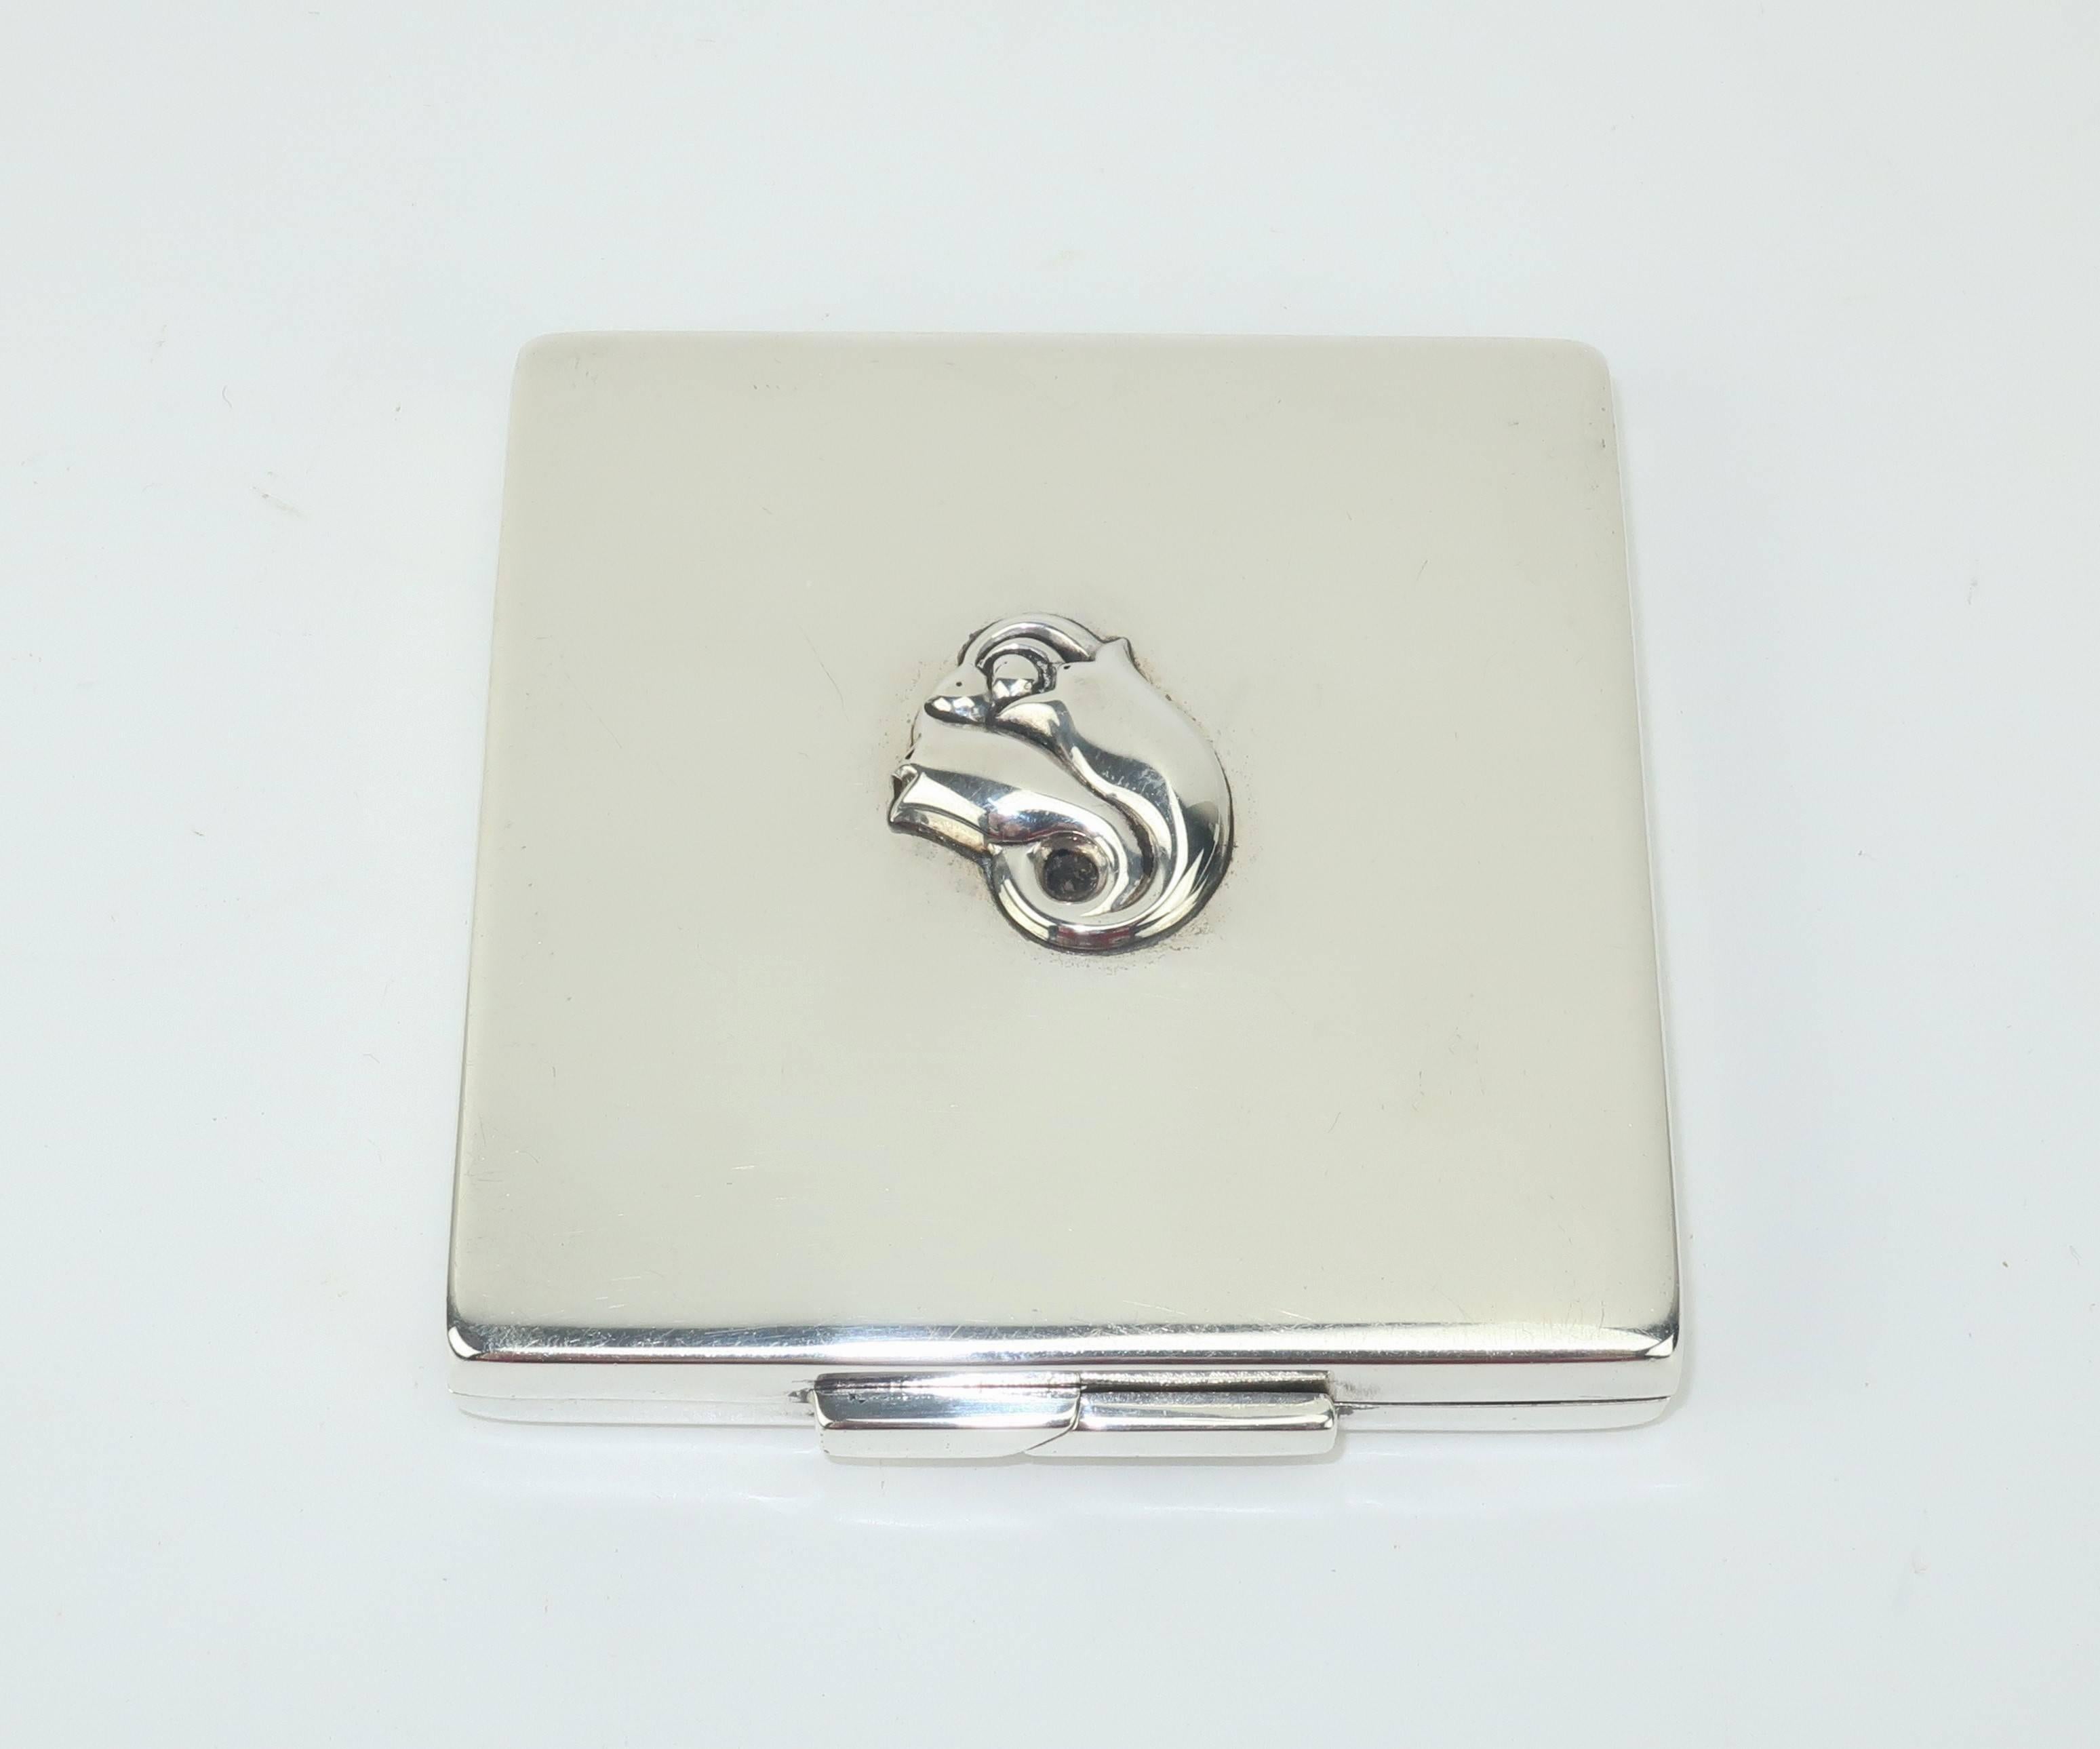 Georg Jensen's name has been synonymous with high quality Danish design in metalwork since the early 1900's.  This sterling silver powder compact is an elegant example of his work with a traditional square form sporting a modernist closure and tulip